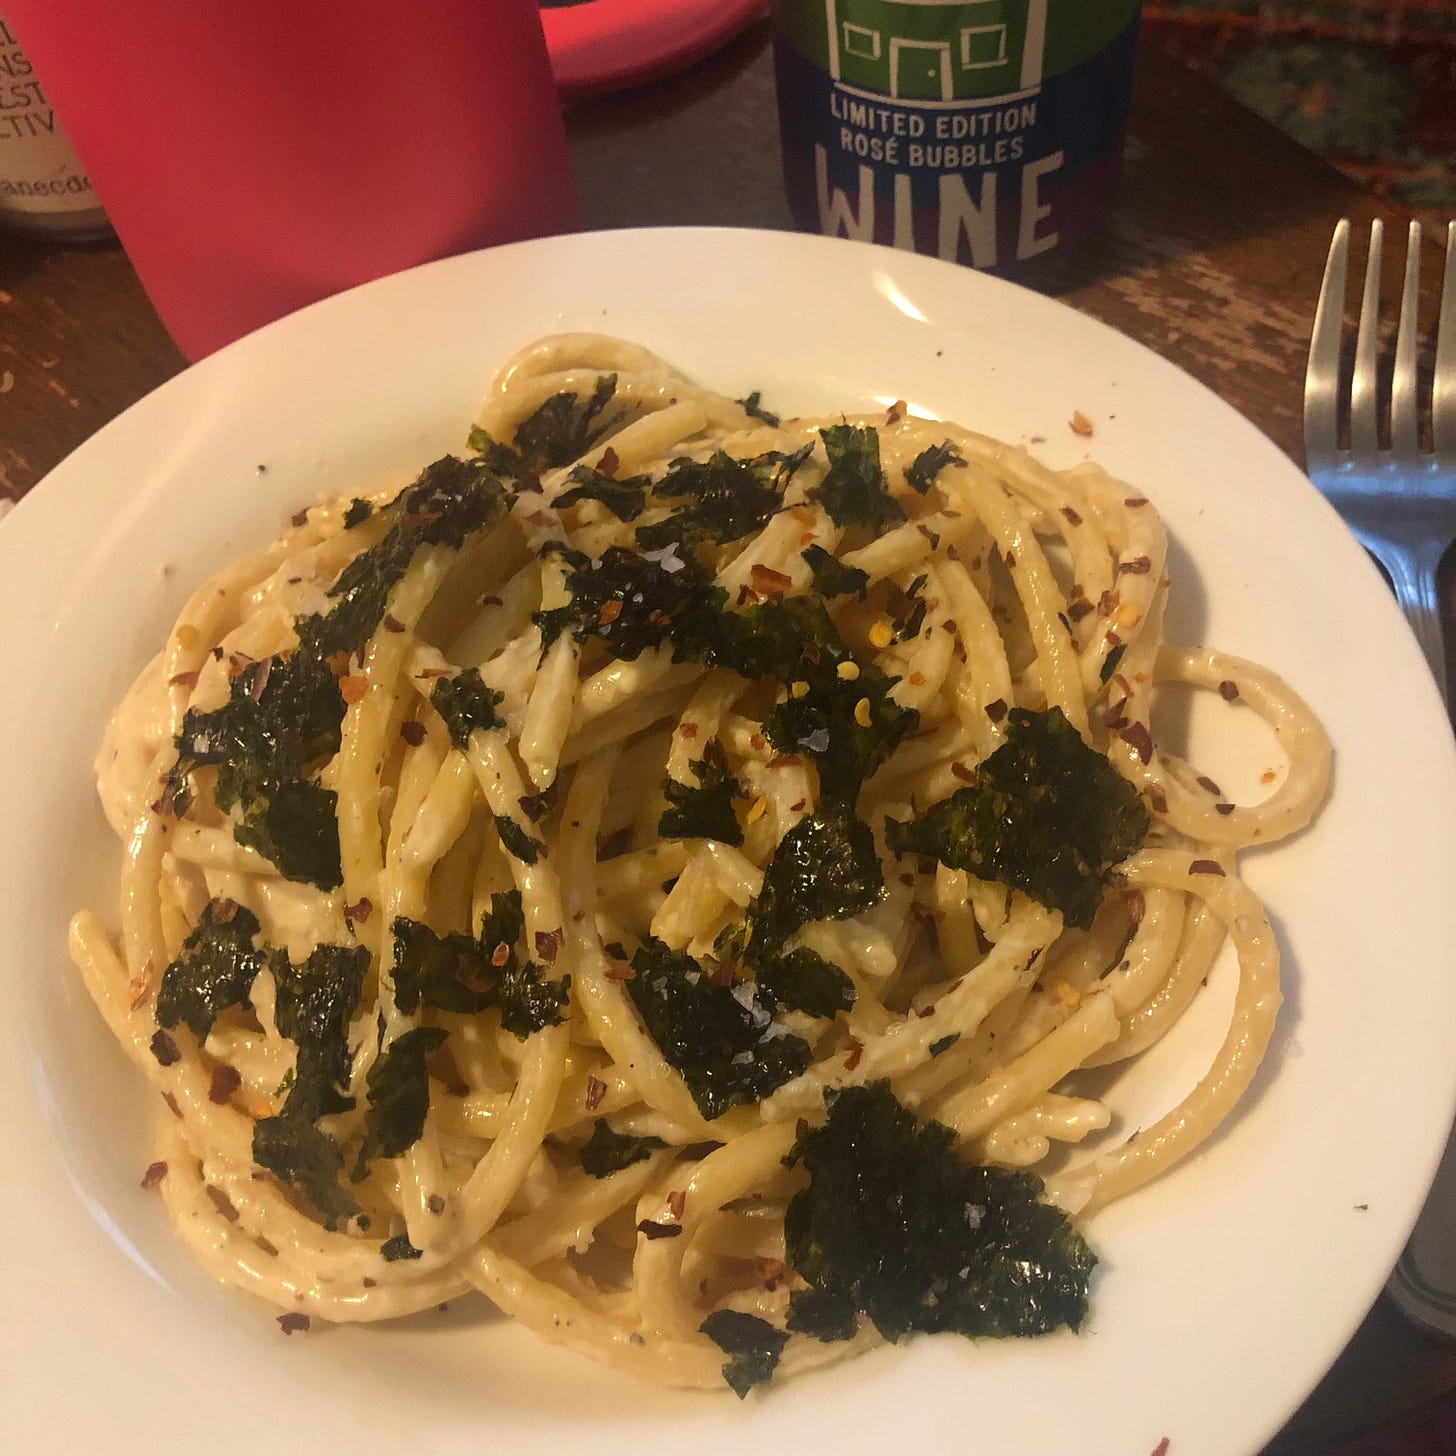 Image: bucatini in cream sauce with roasted seaweed on top, sprinkled with red chili flakes and served with a canned sparkling rosé